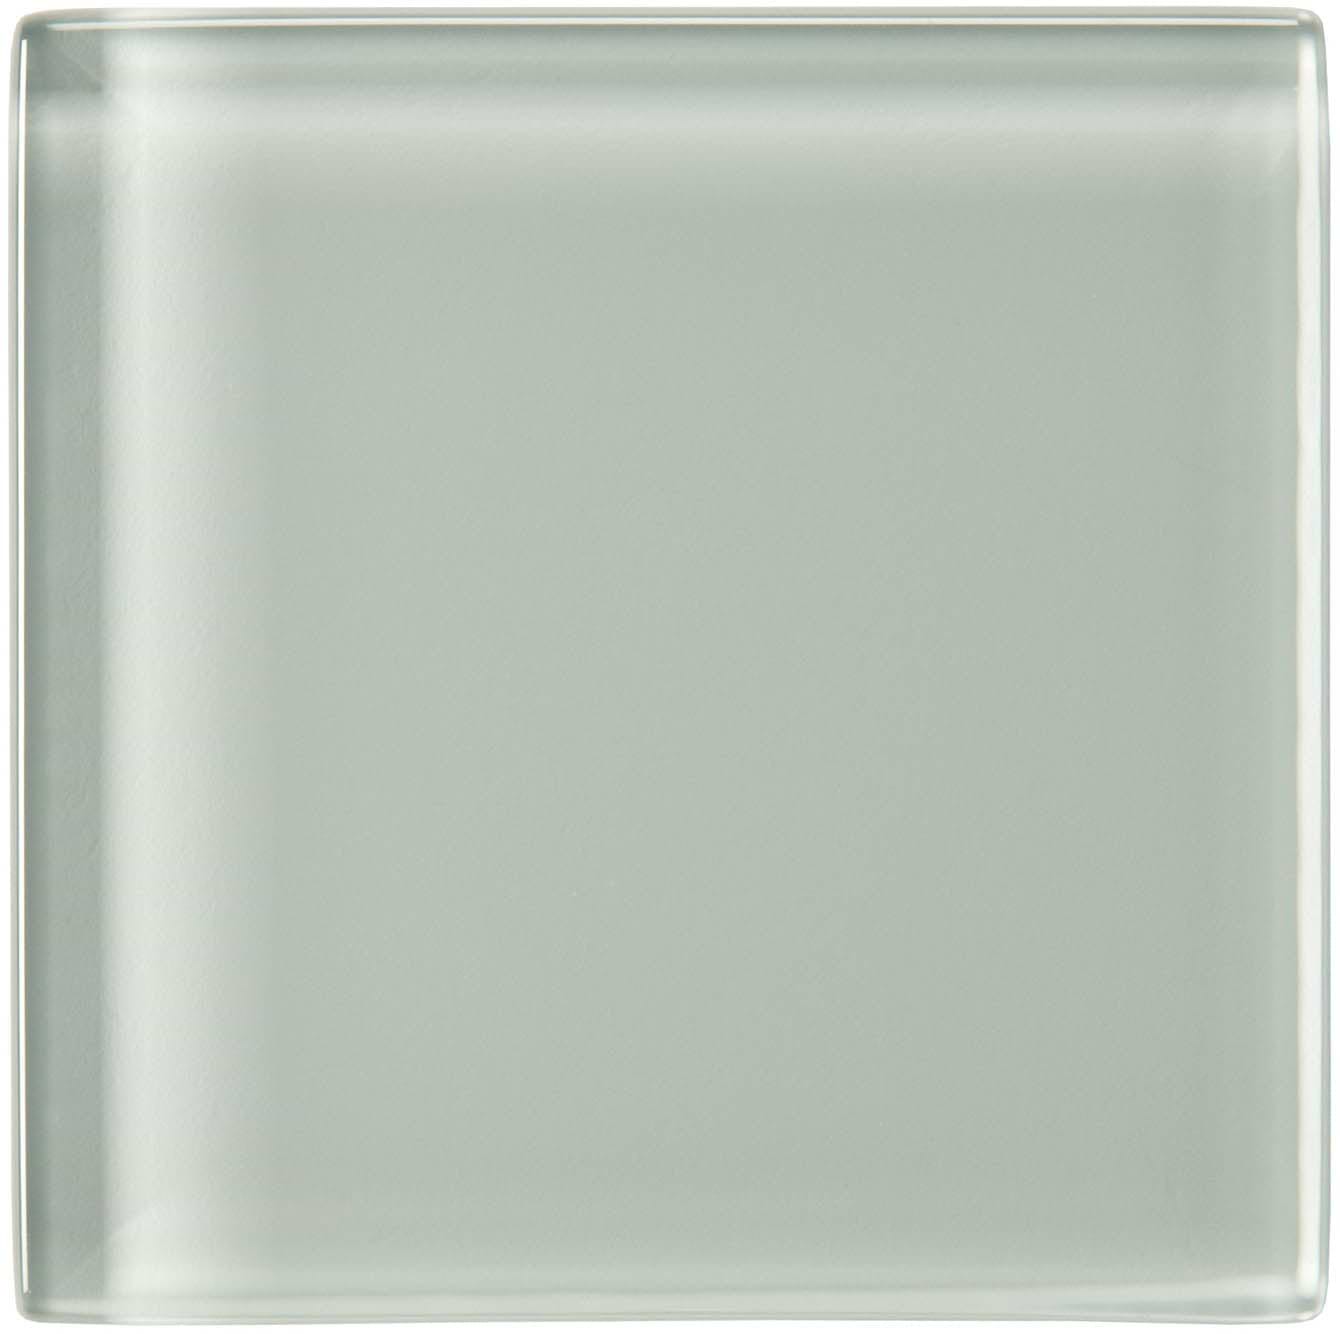 Thames Clear Glass 100 x 100mm - Hyperion Tiles